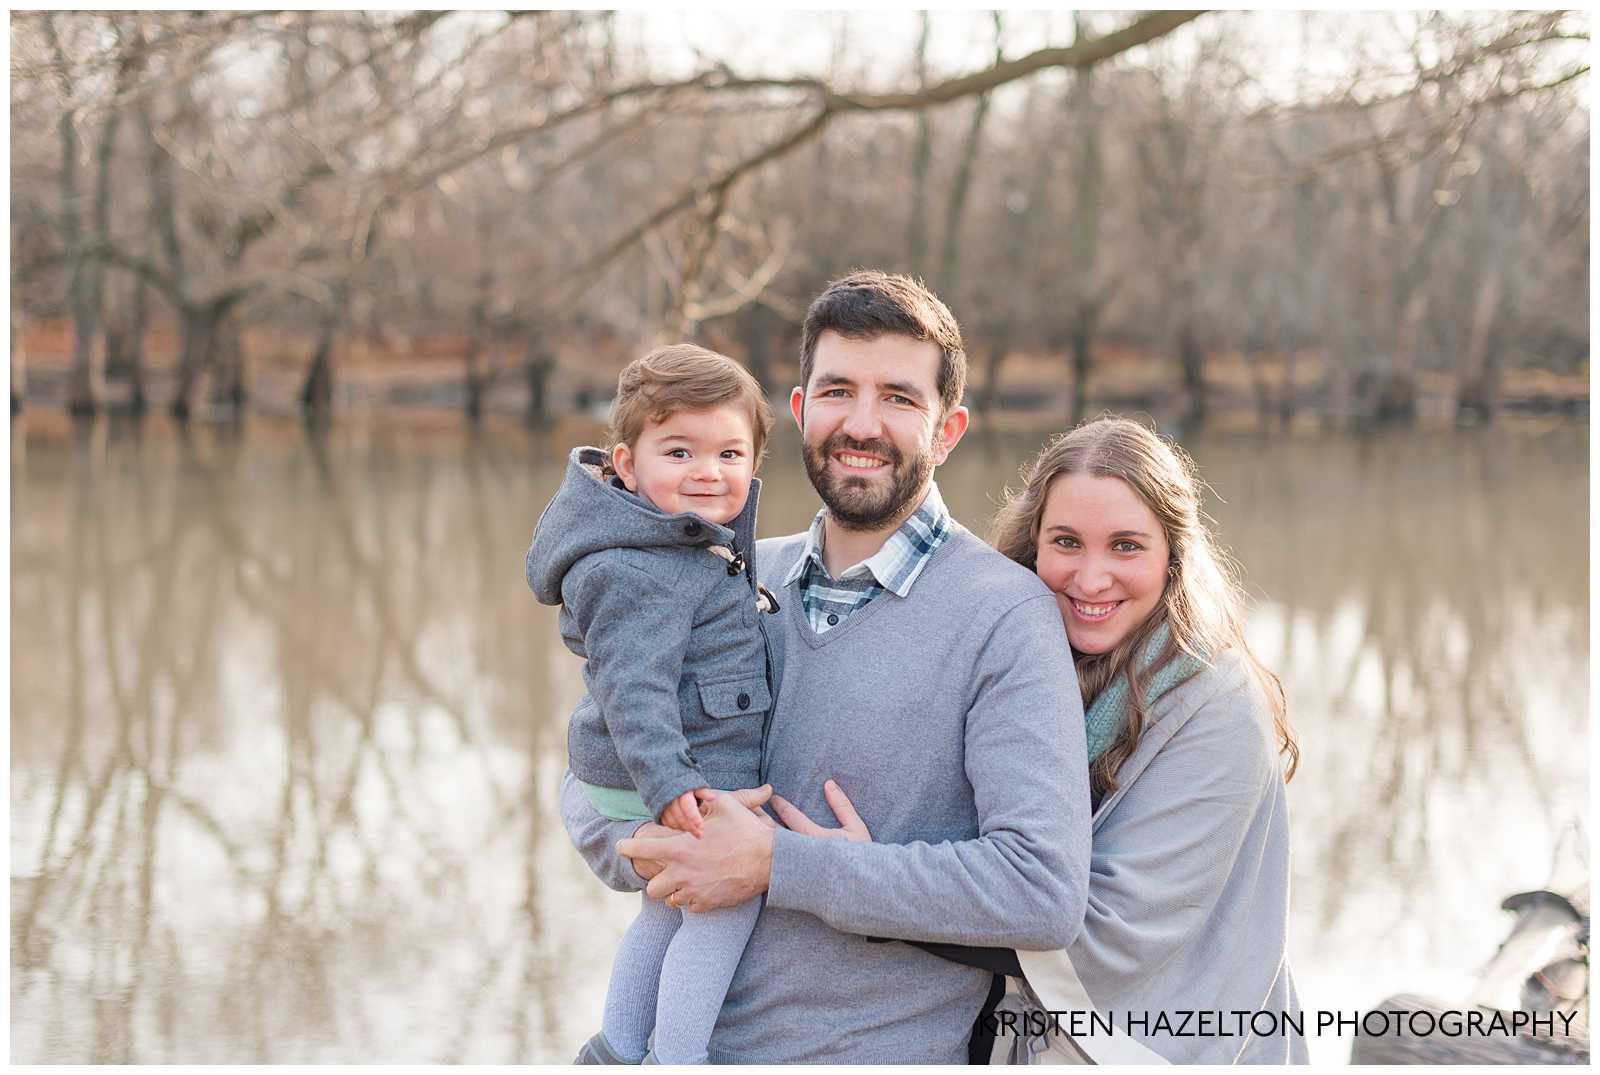 Oak Park maternity photos with a family of three in Thatcher Woods, River Forest, IL